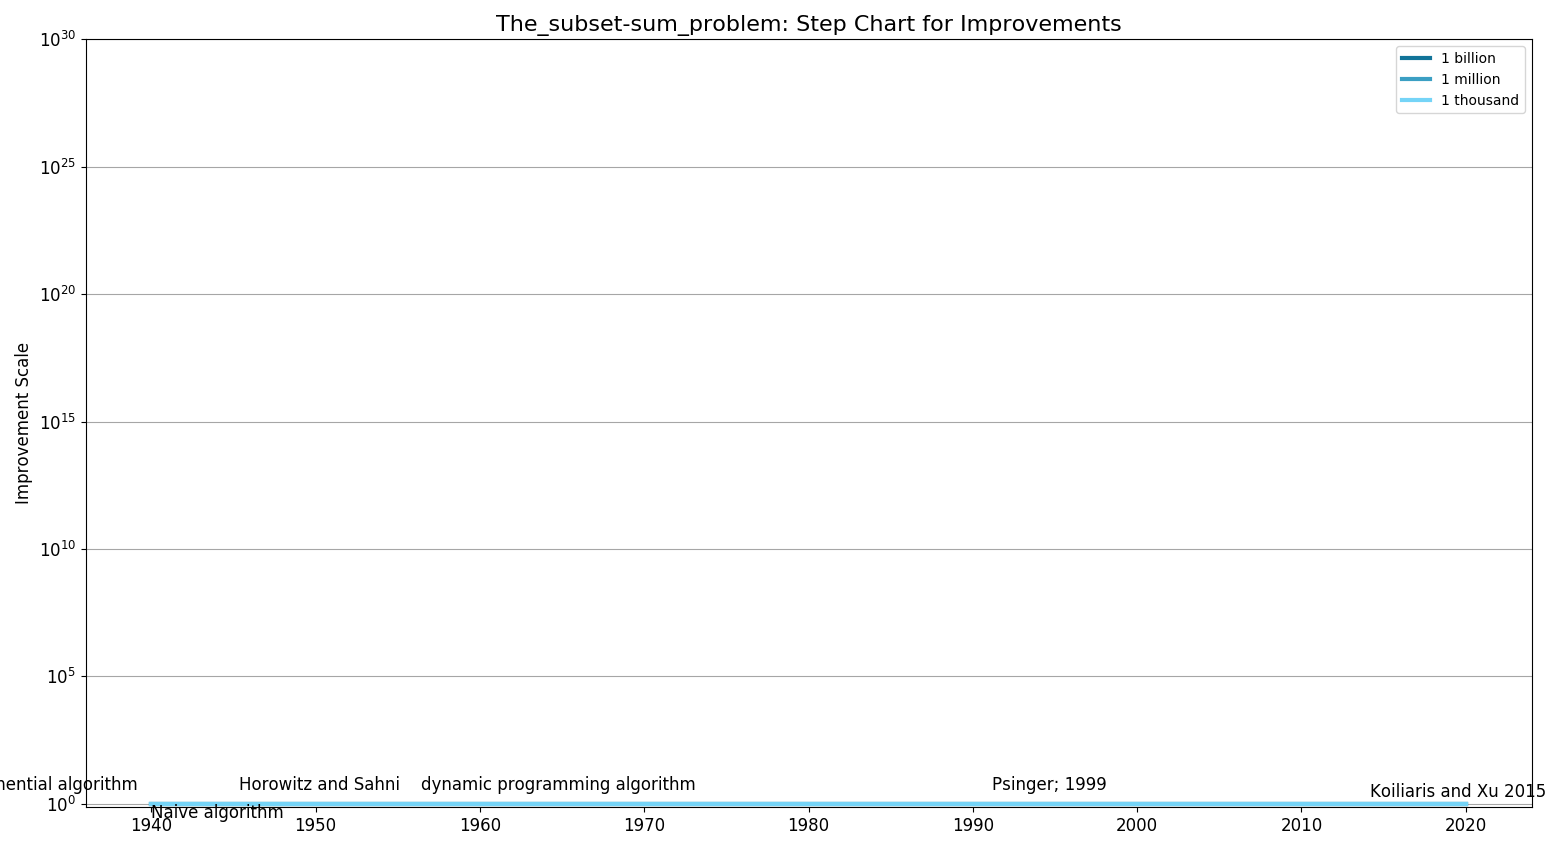 The subset-sum problemStepChart.png